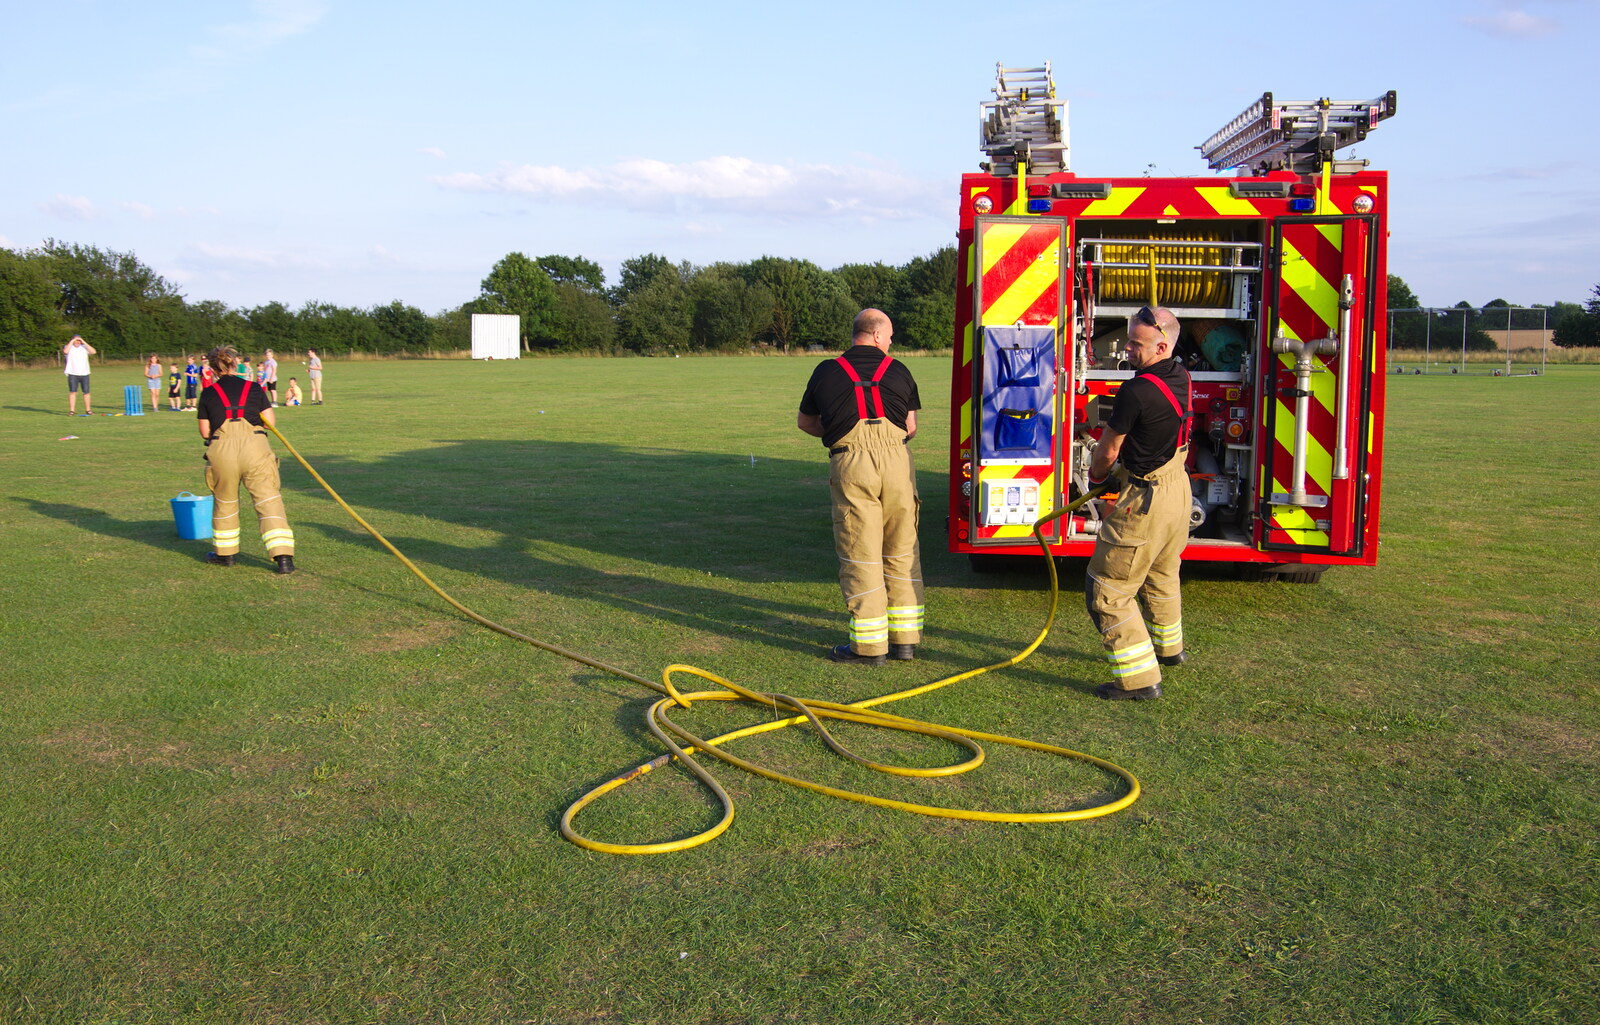 Hoses are unrolled from A Water Fight with a Fire Engine, Eye Cricket Club, Suffolk - 5th August 2019